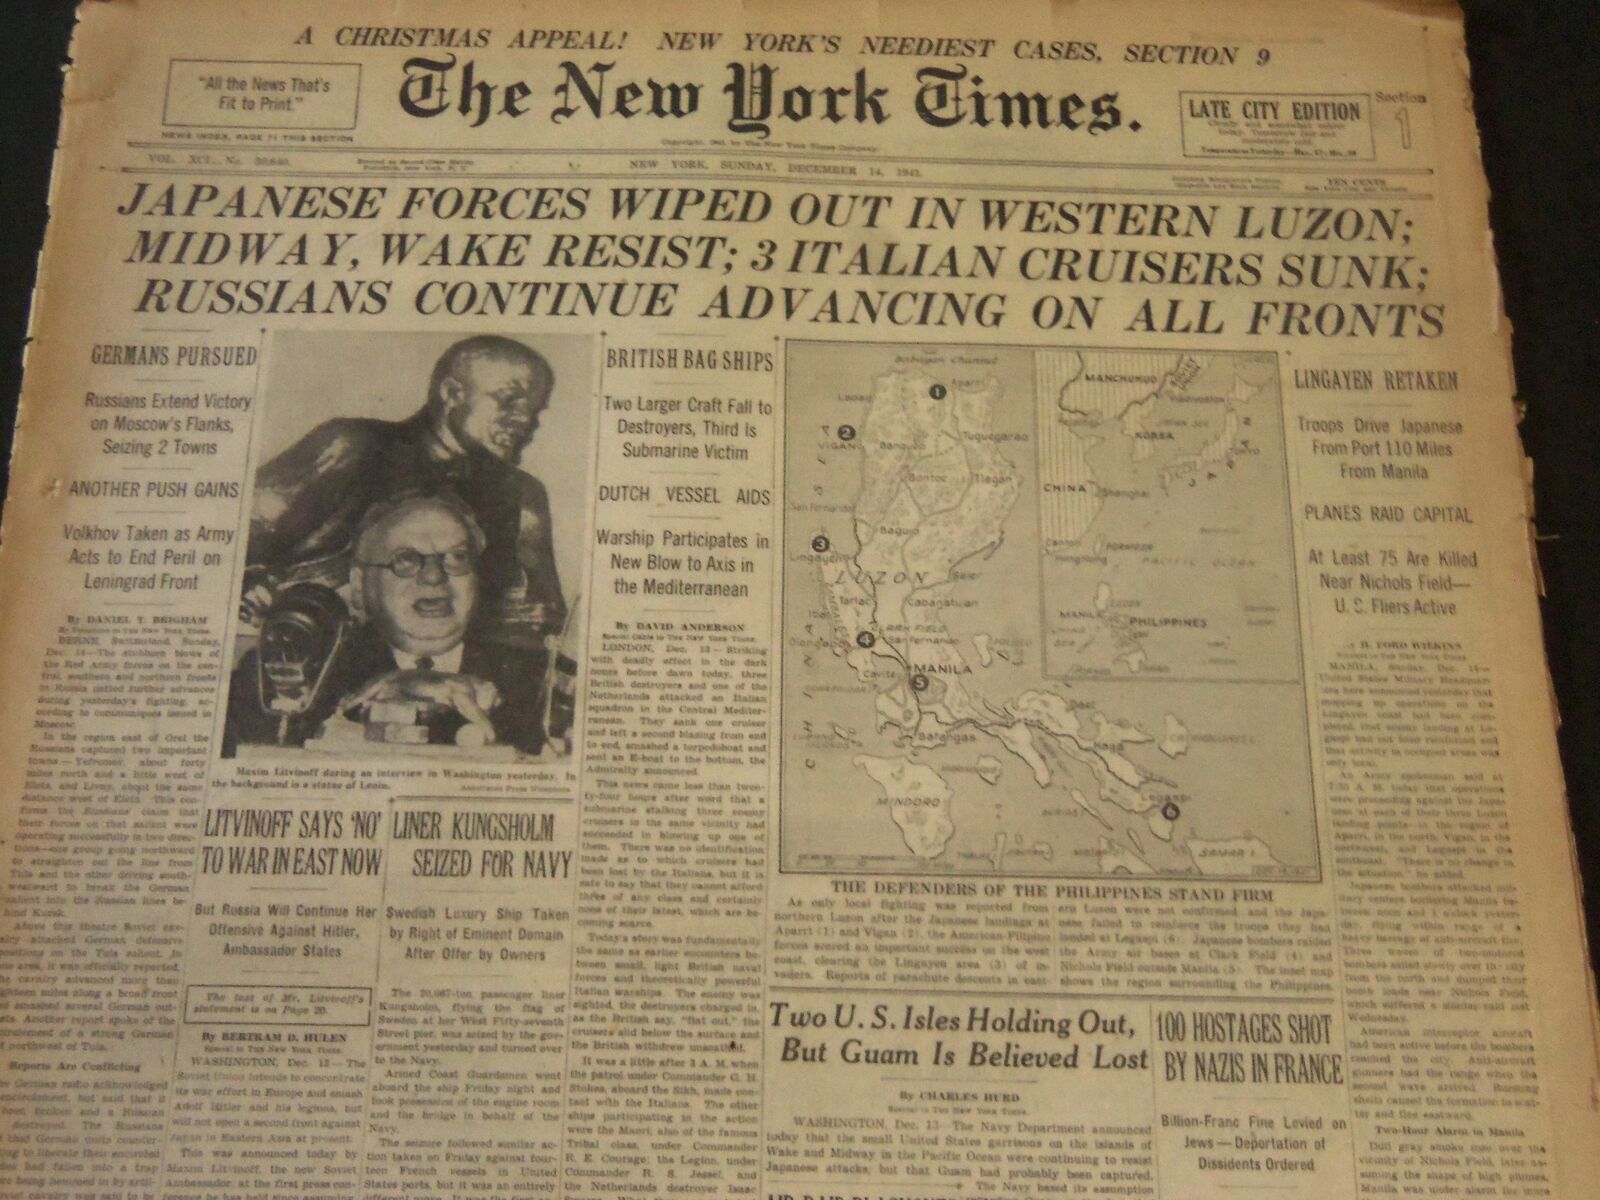 1941 DECEMBER 14 NEW YORK TIMES - JAPANESE FORCES WIPED OUT IN LUZON - NT 6162